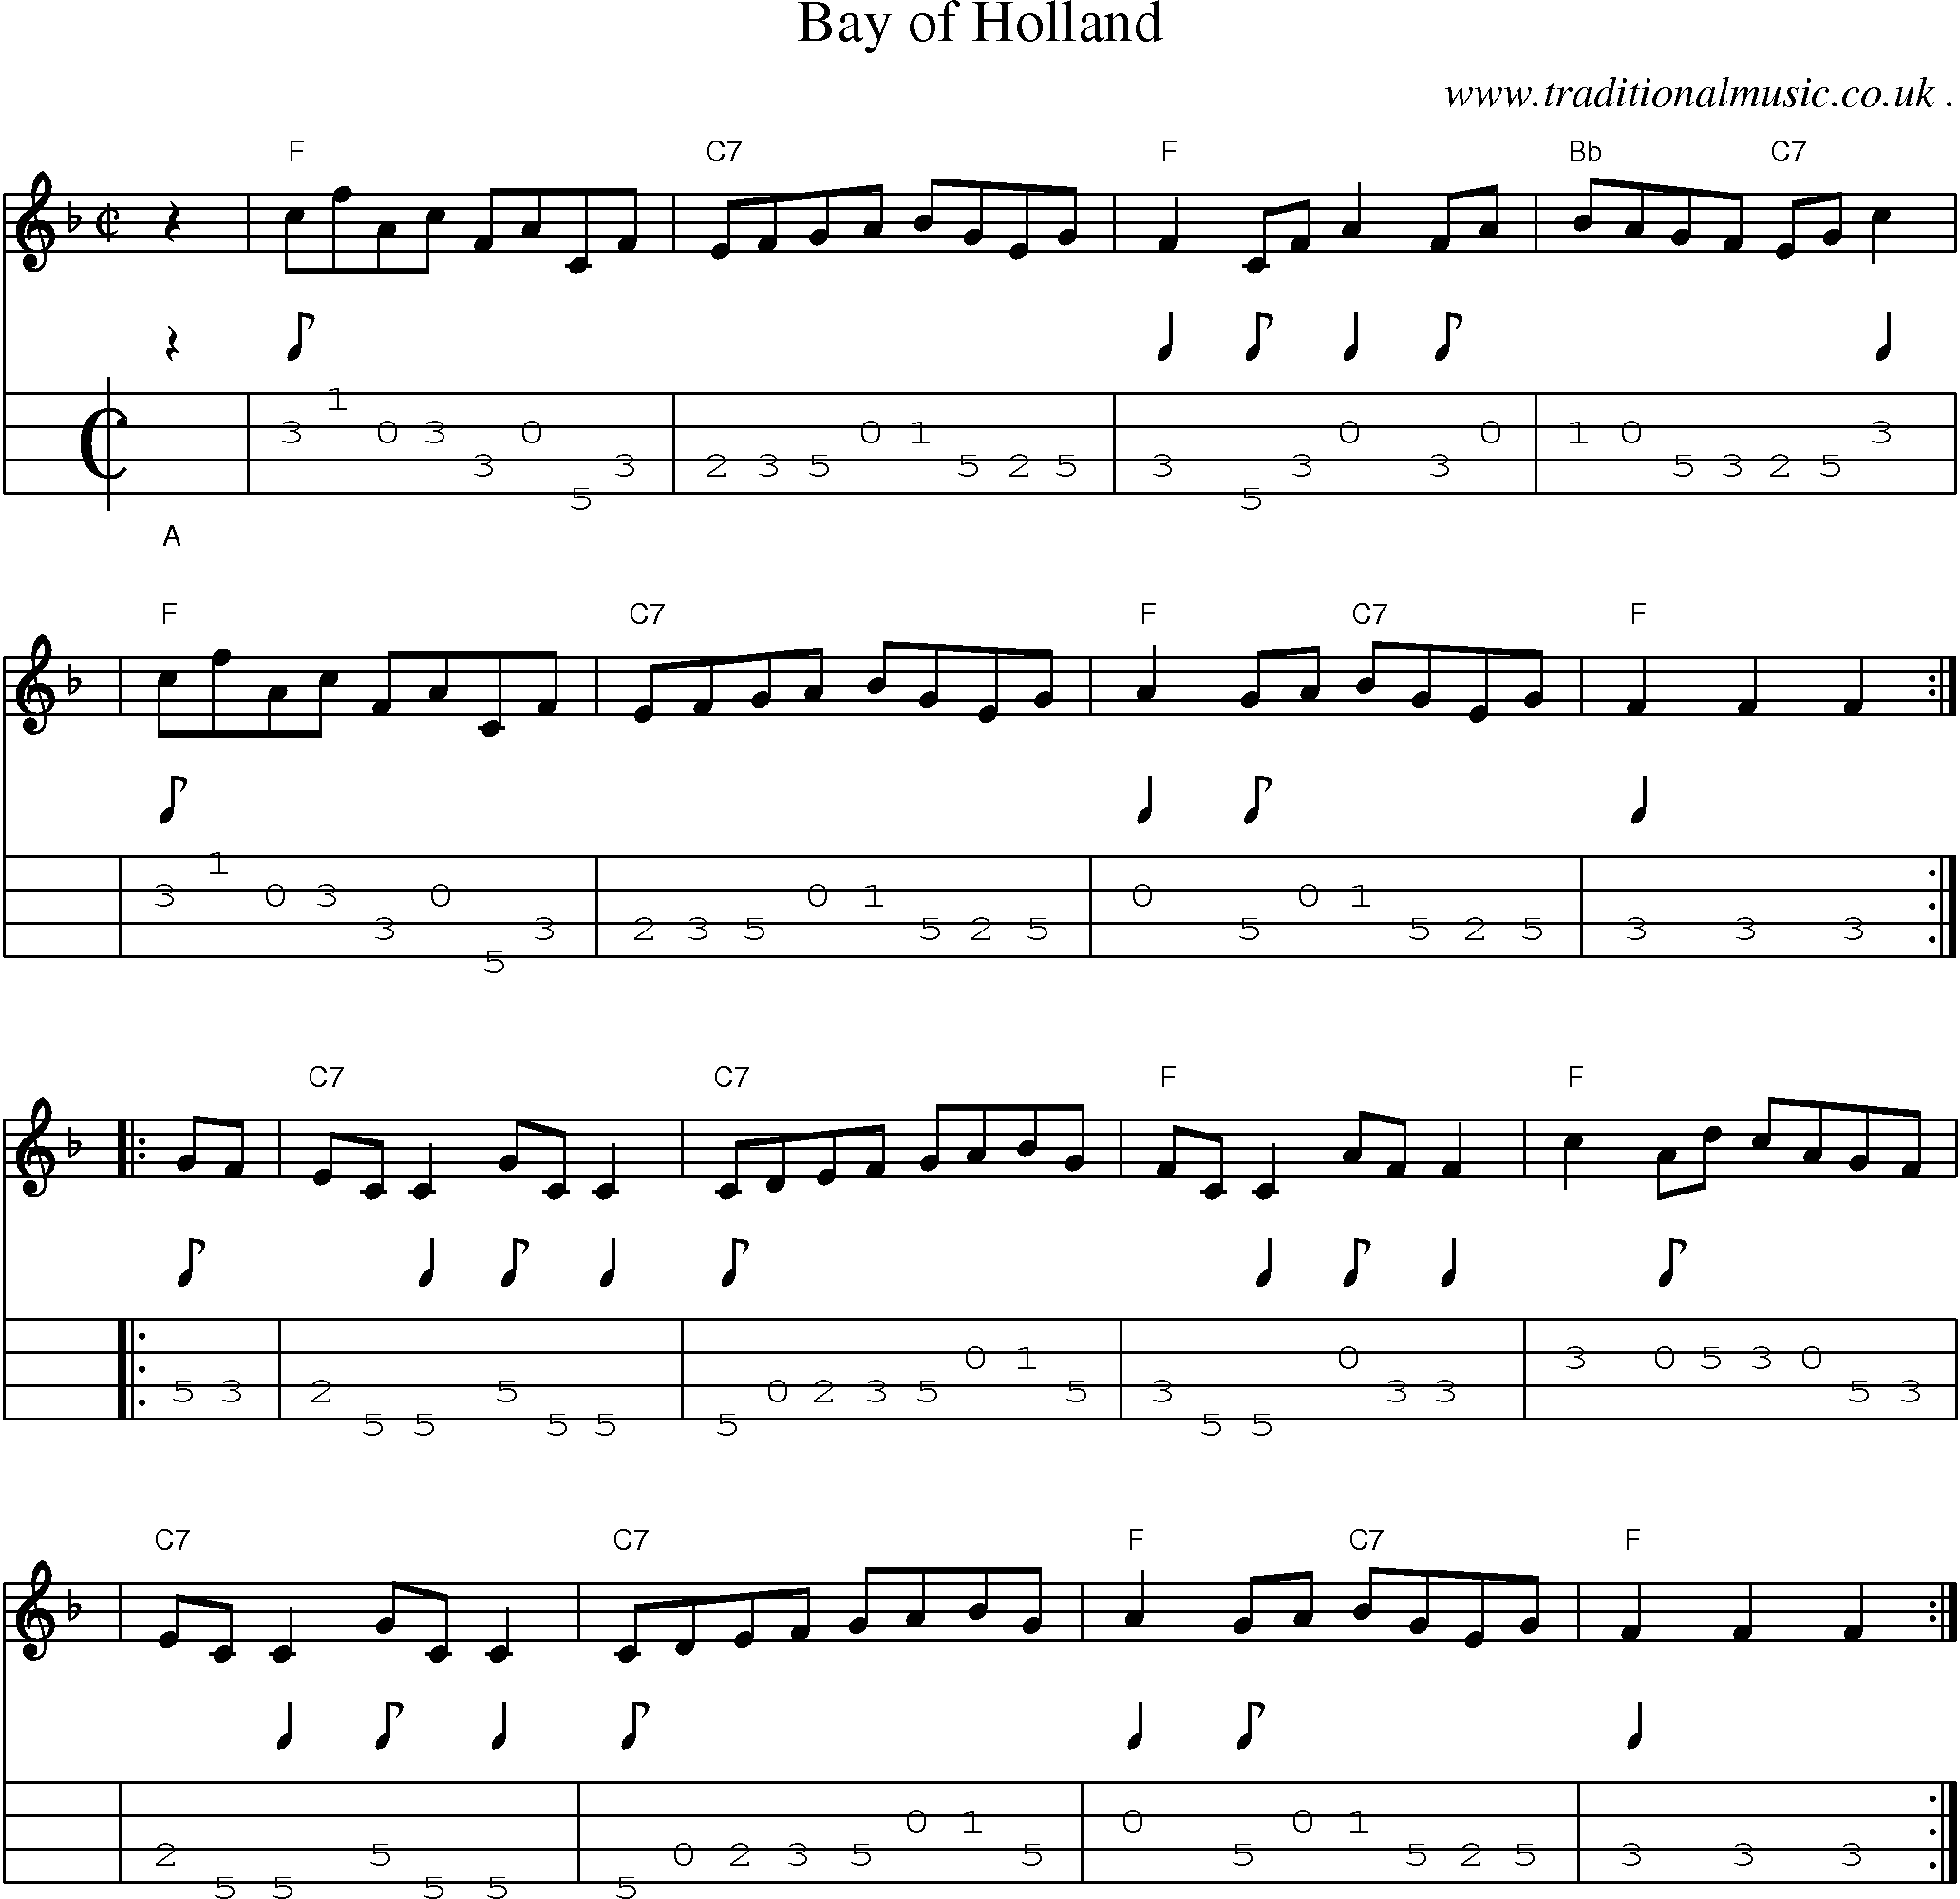 Sheet-music  score, Chords and Mandolin Tabs for Bay Of Holland